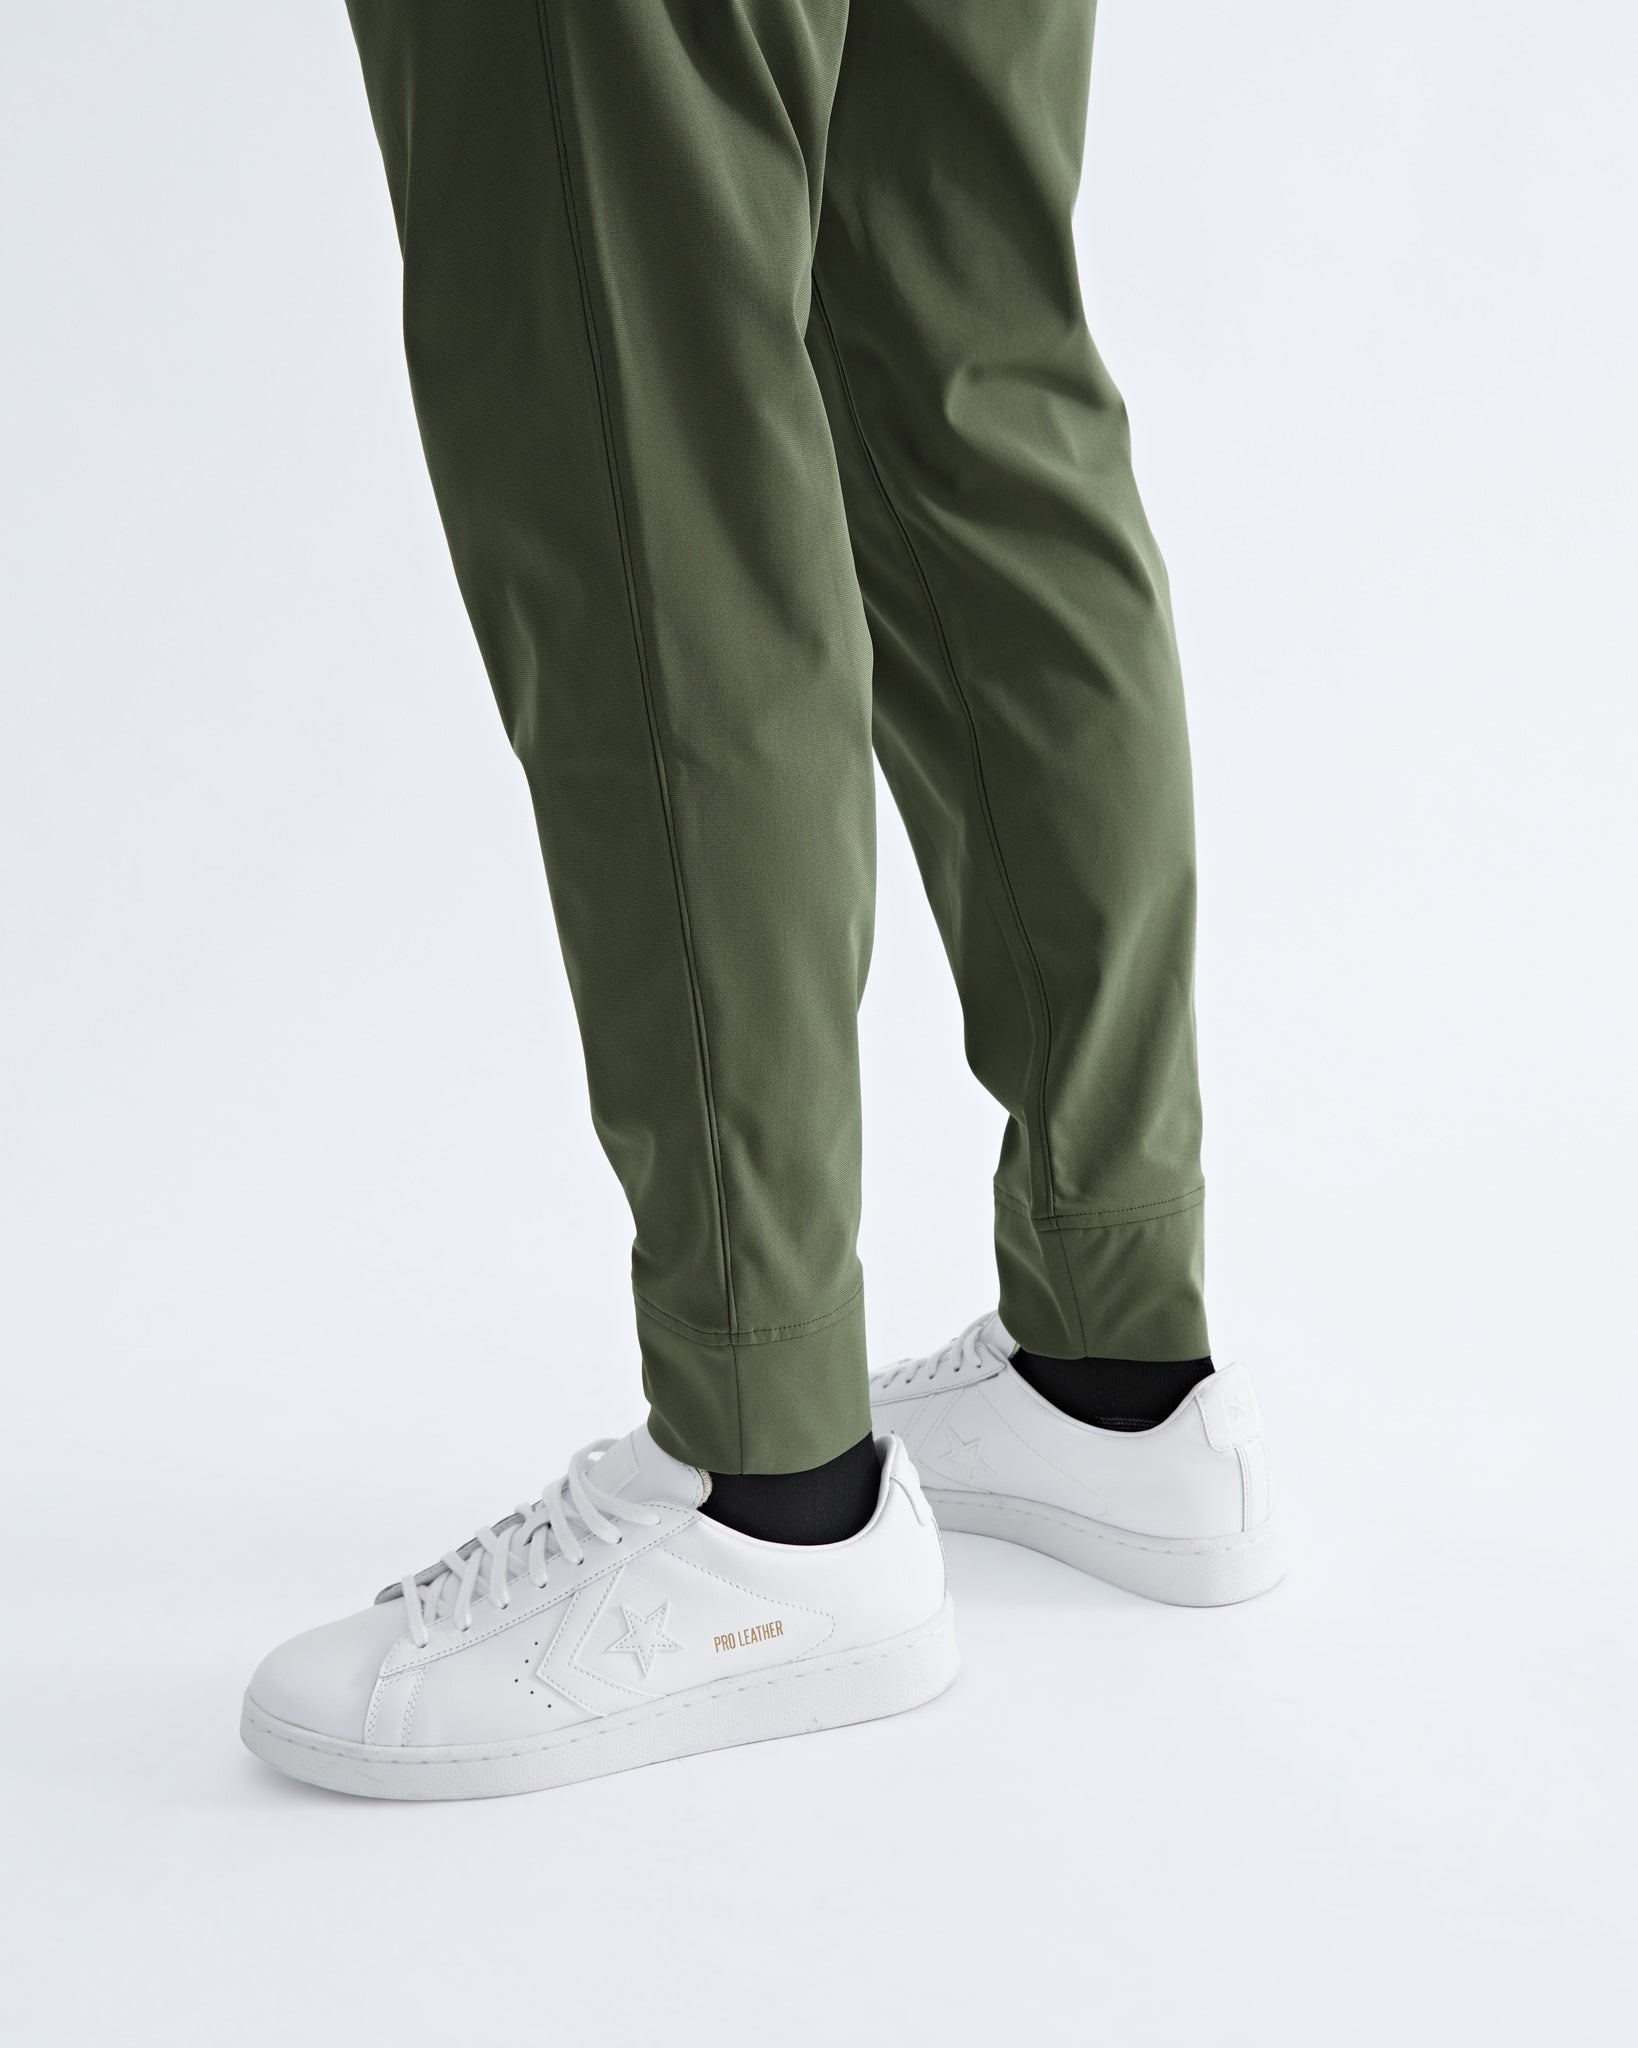 Coach's Jogger | Reigning Champ